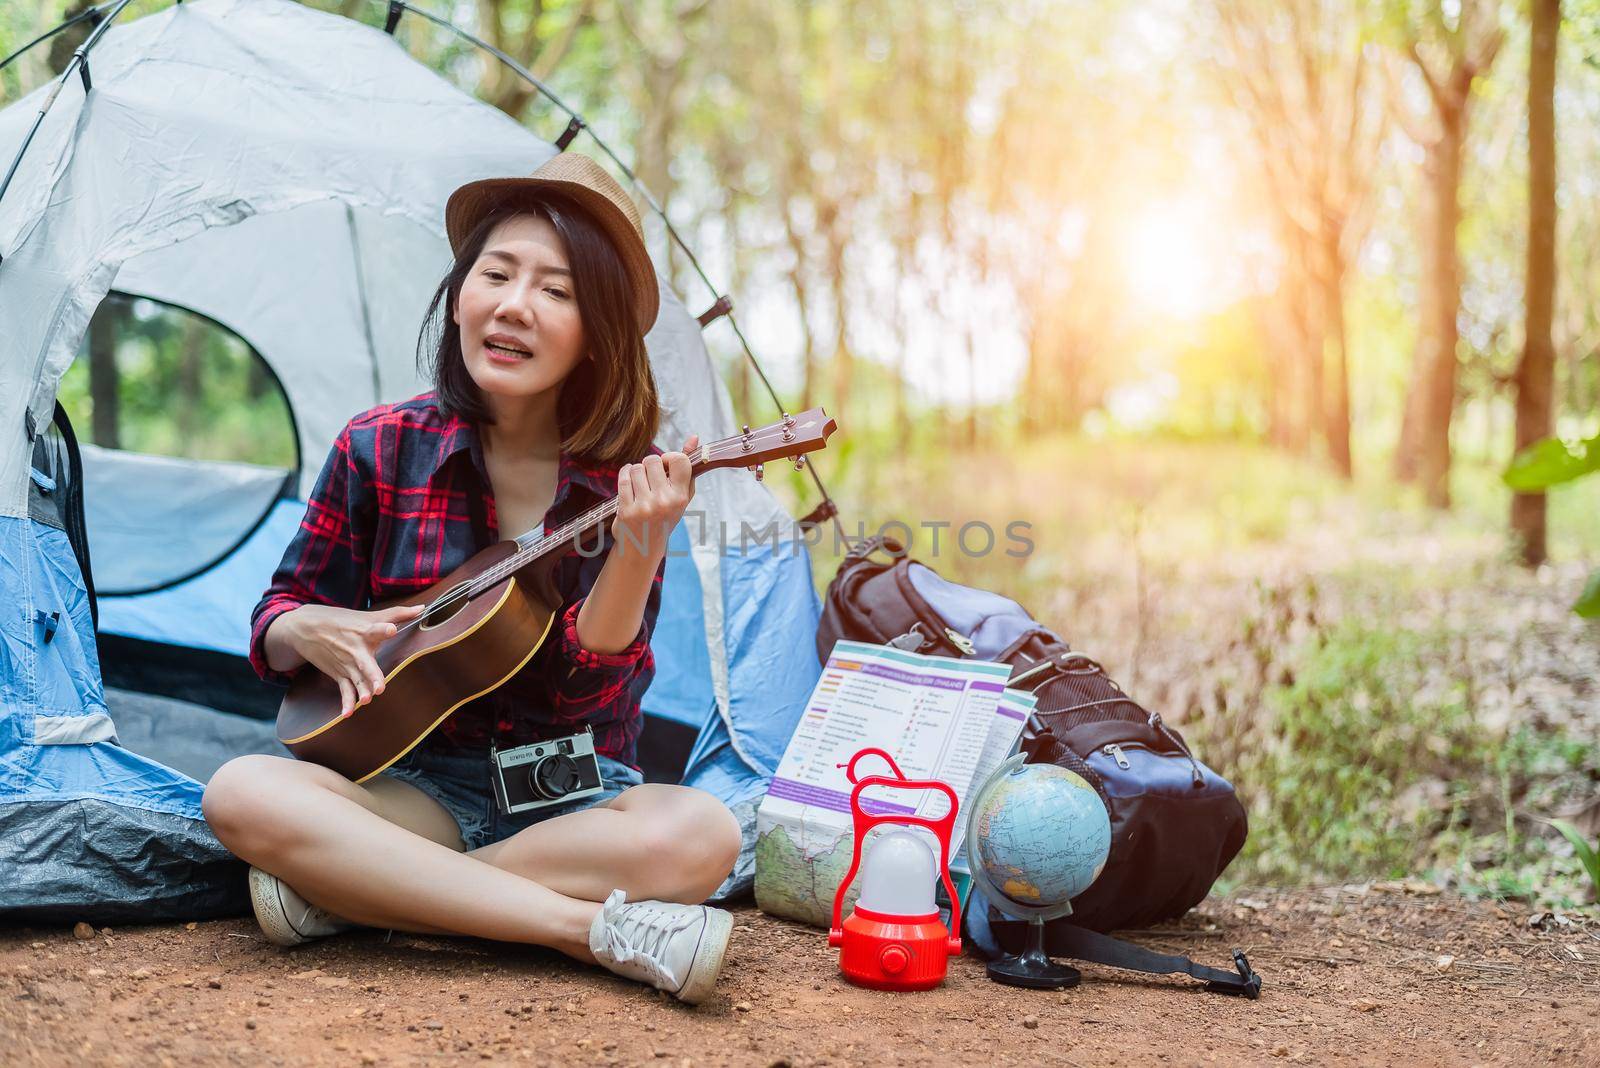 Beautiful Asian woman playing Ukulele in front of camping tent in pine woods. People and Lifestyles concept. Adventure and Travel theme. by MiniStocker